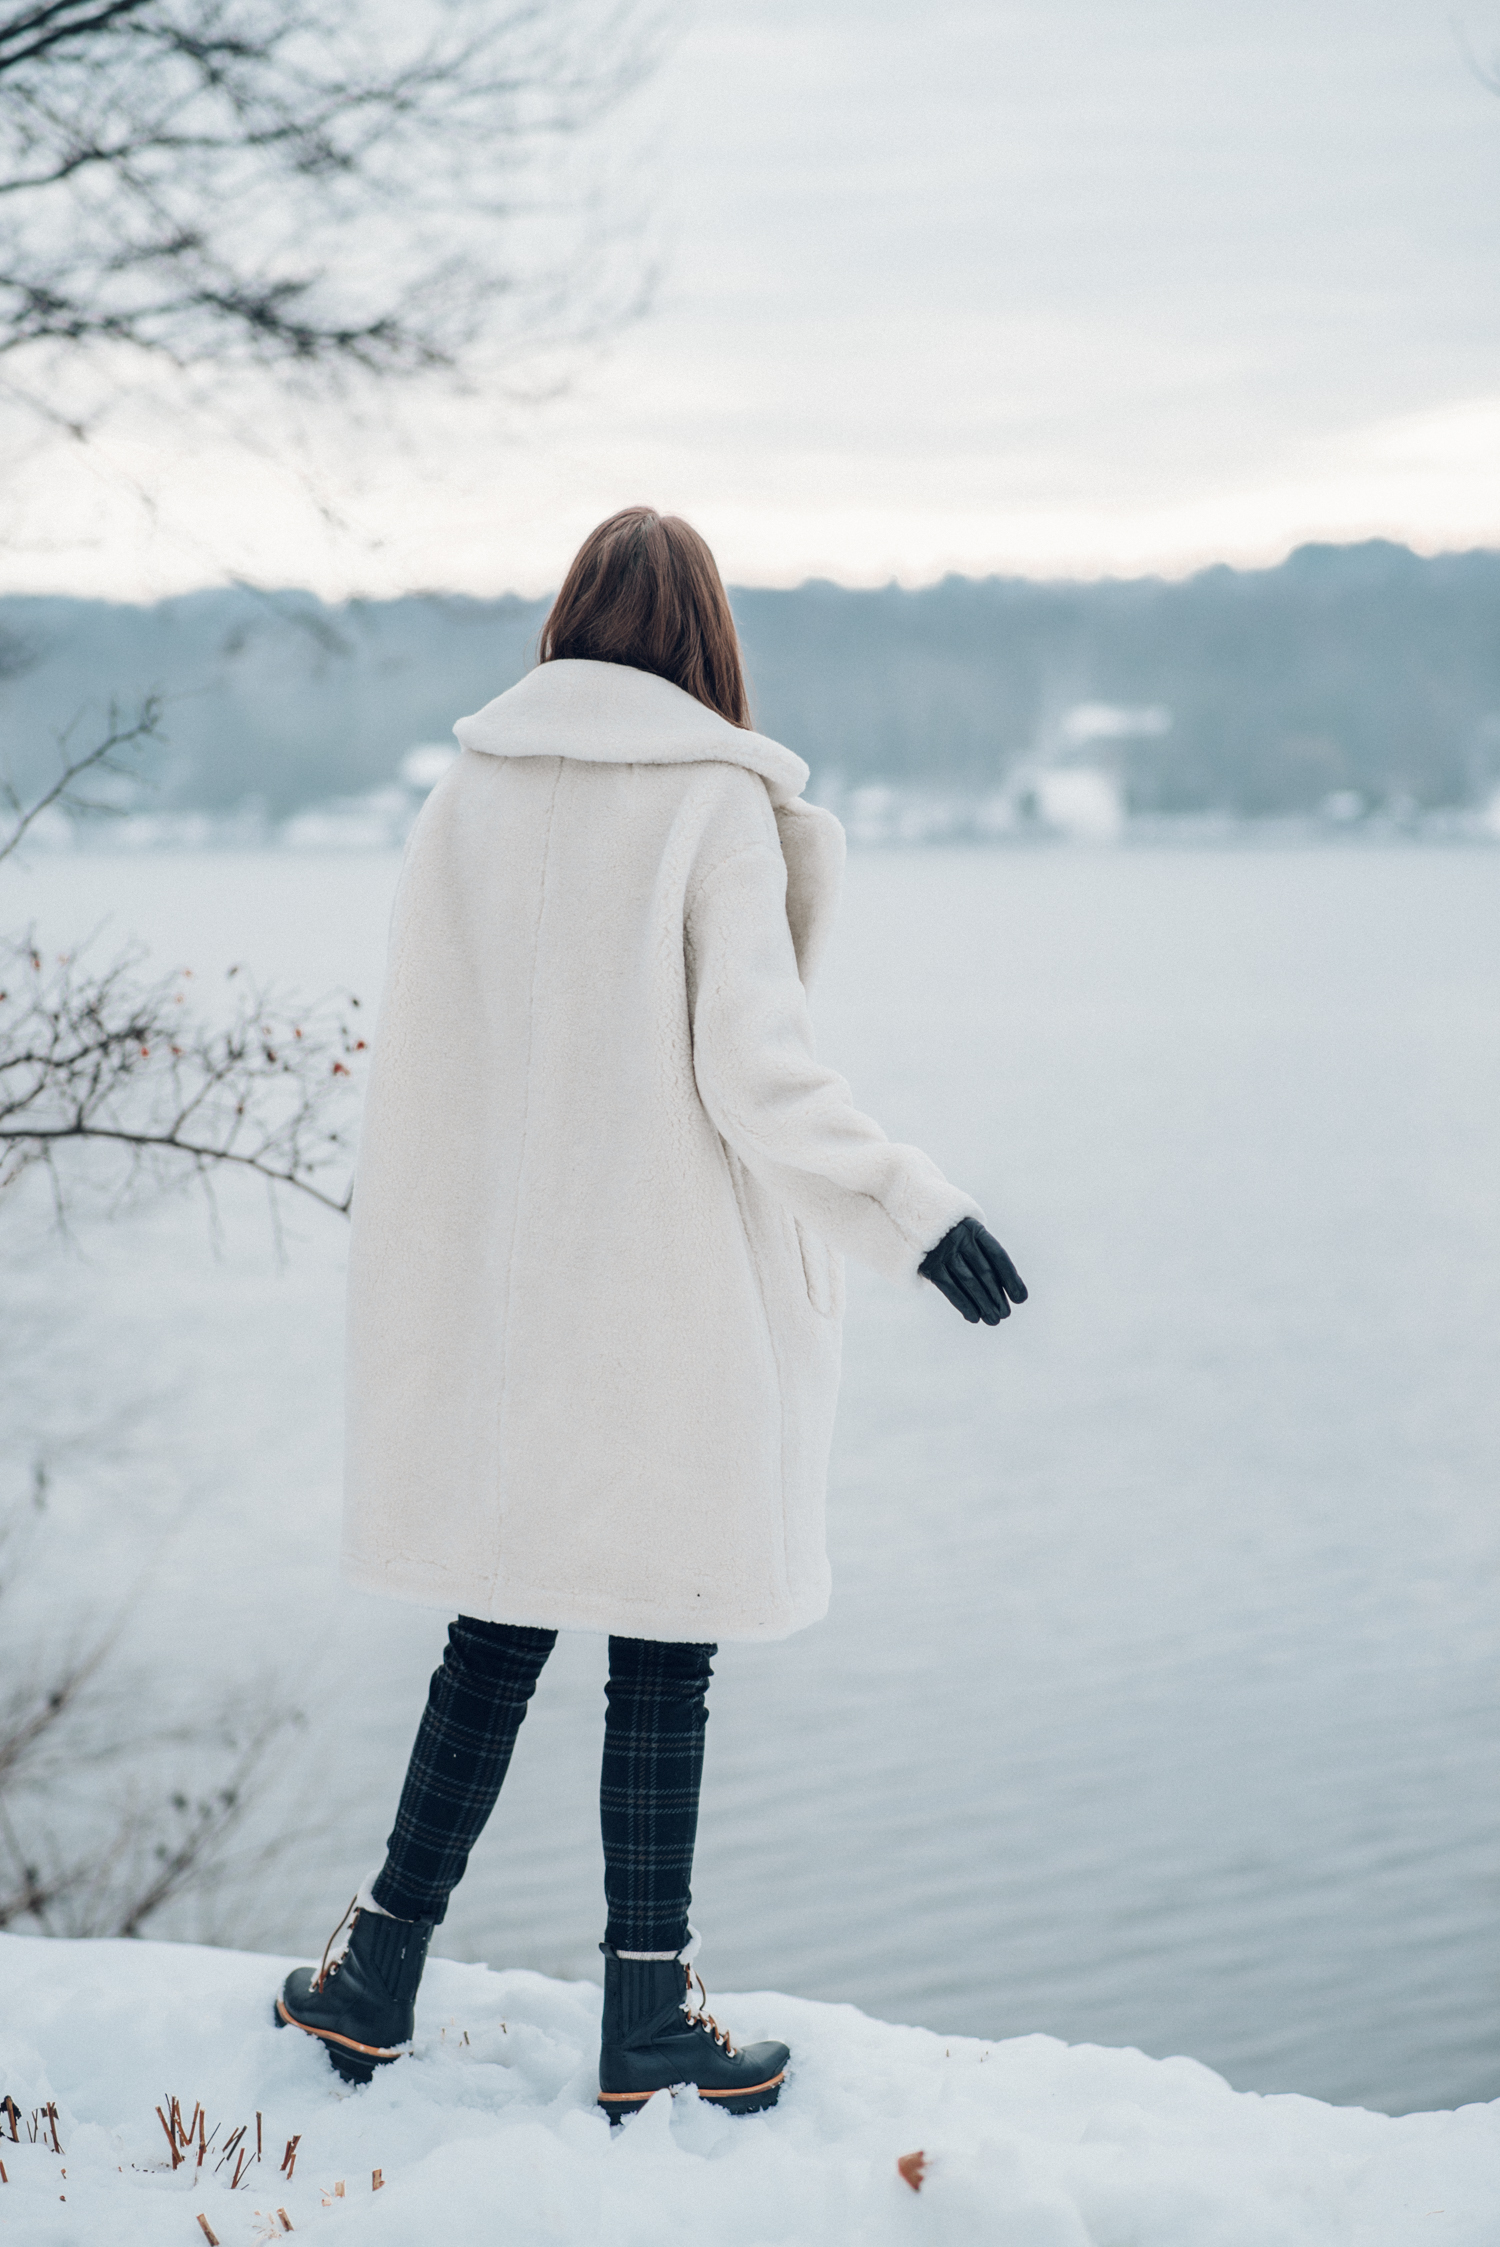 Alyssa Campanella of The A List blog visits Manoir Hovey in Québec wearing And Other Stories faux fur coat and Marc Fisher Izzie boots